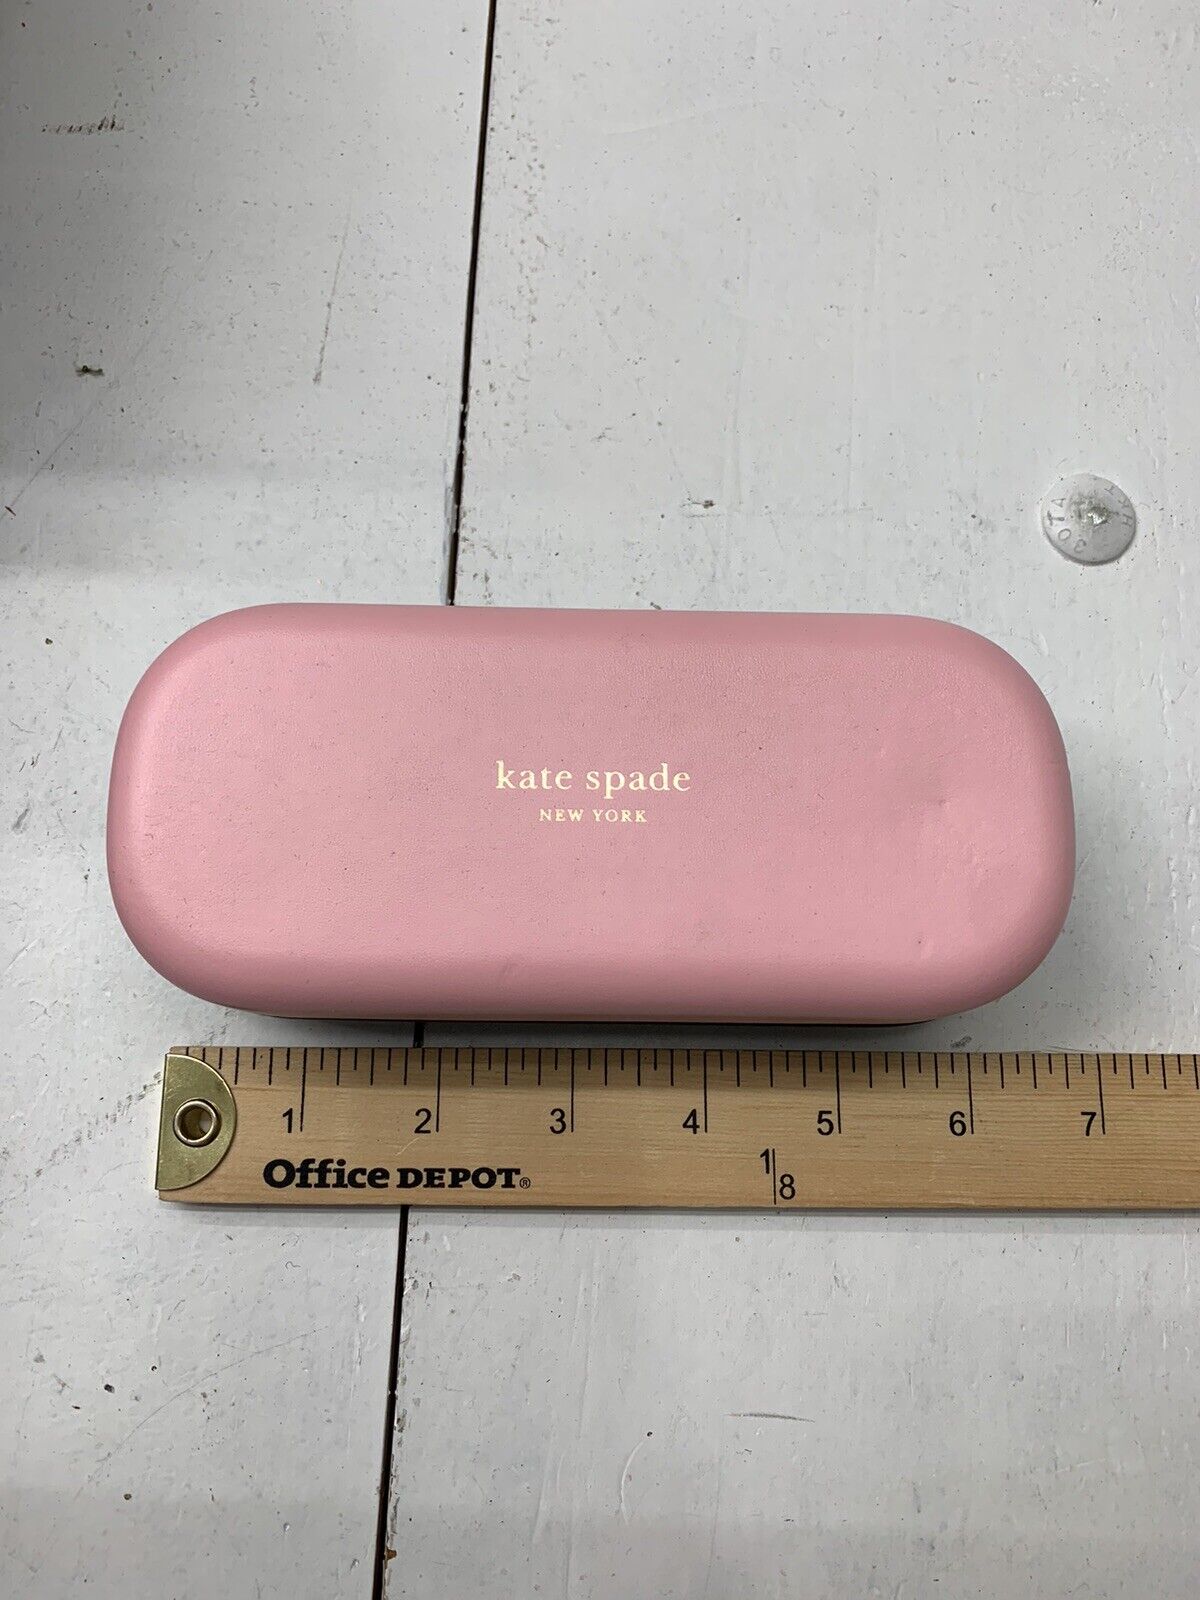 KATE SPADE New York Glasses Case or Sunglasses Case and Sealed